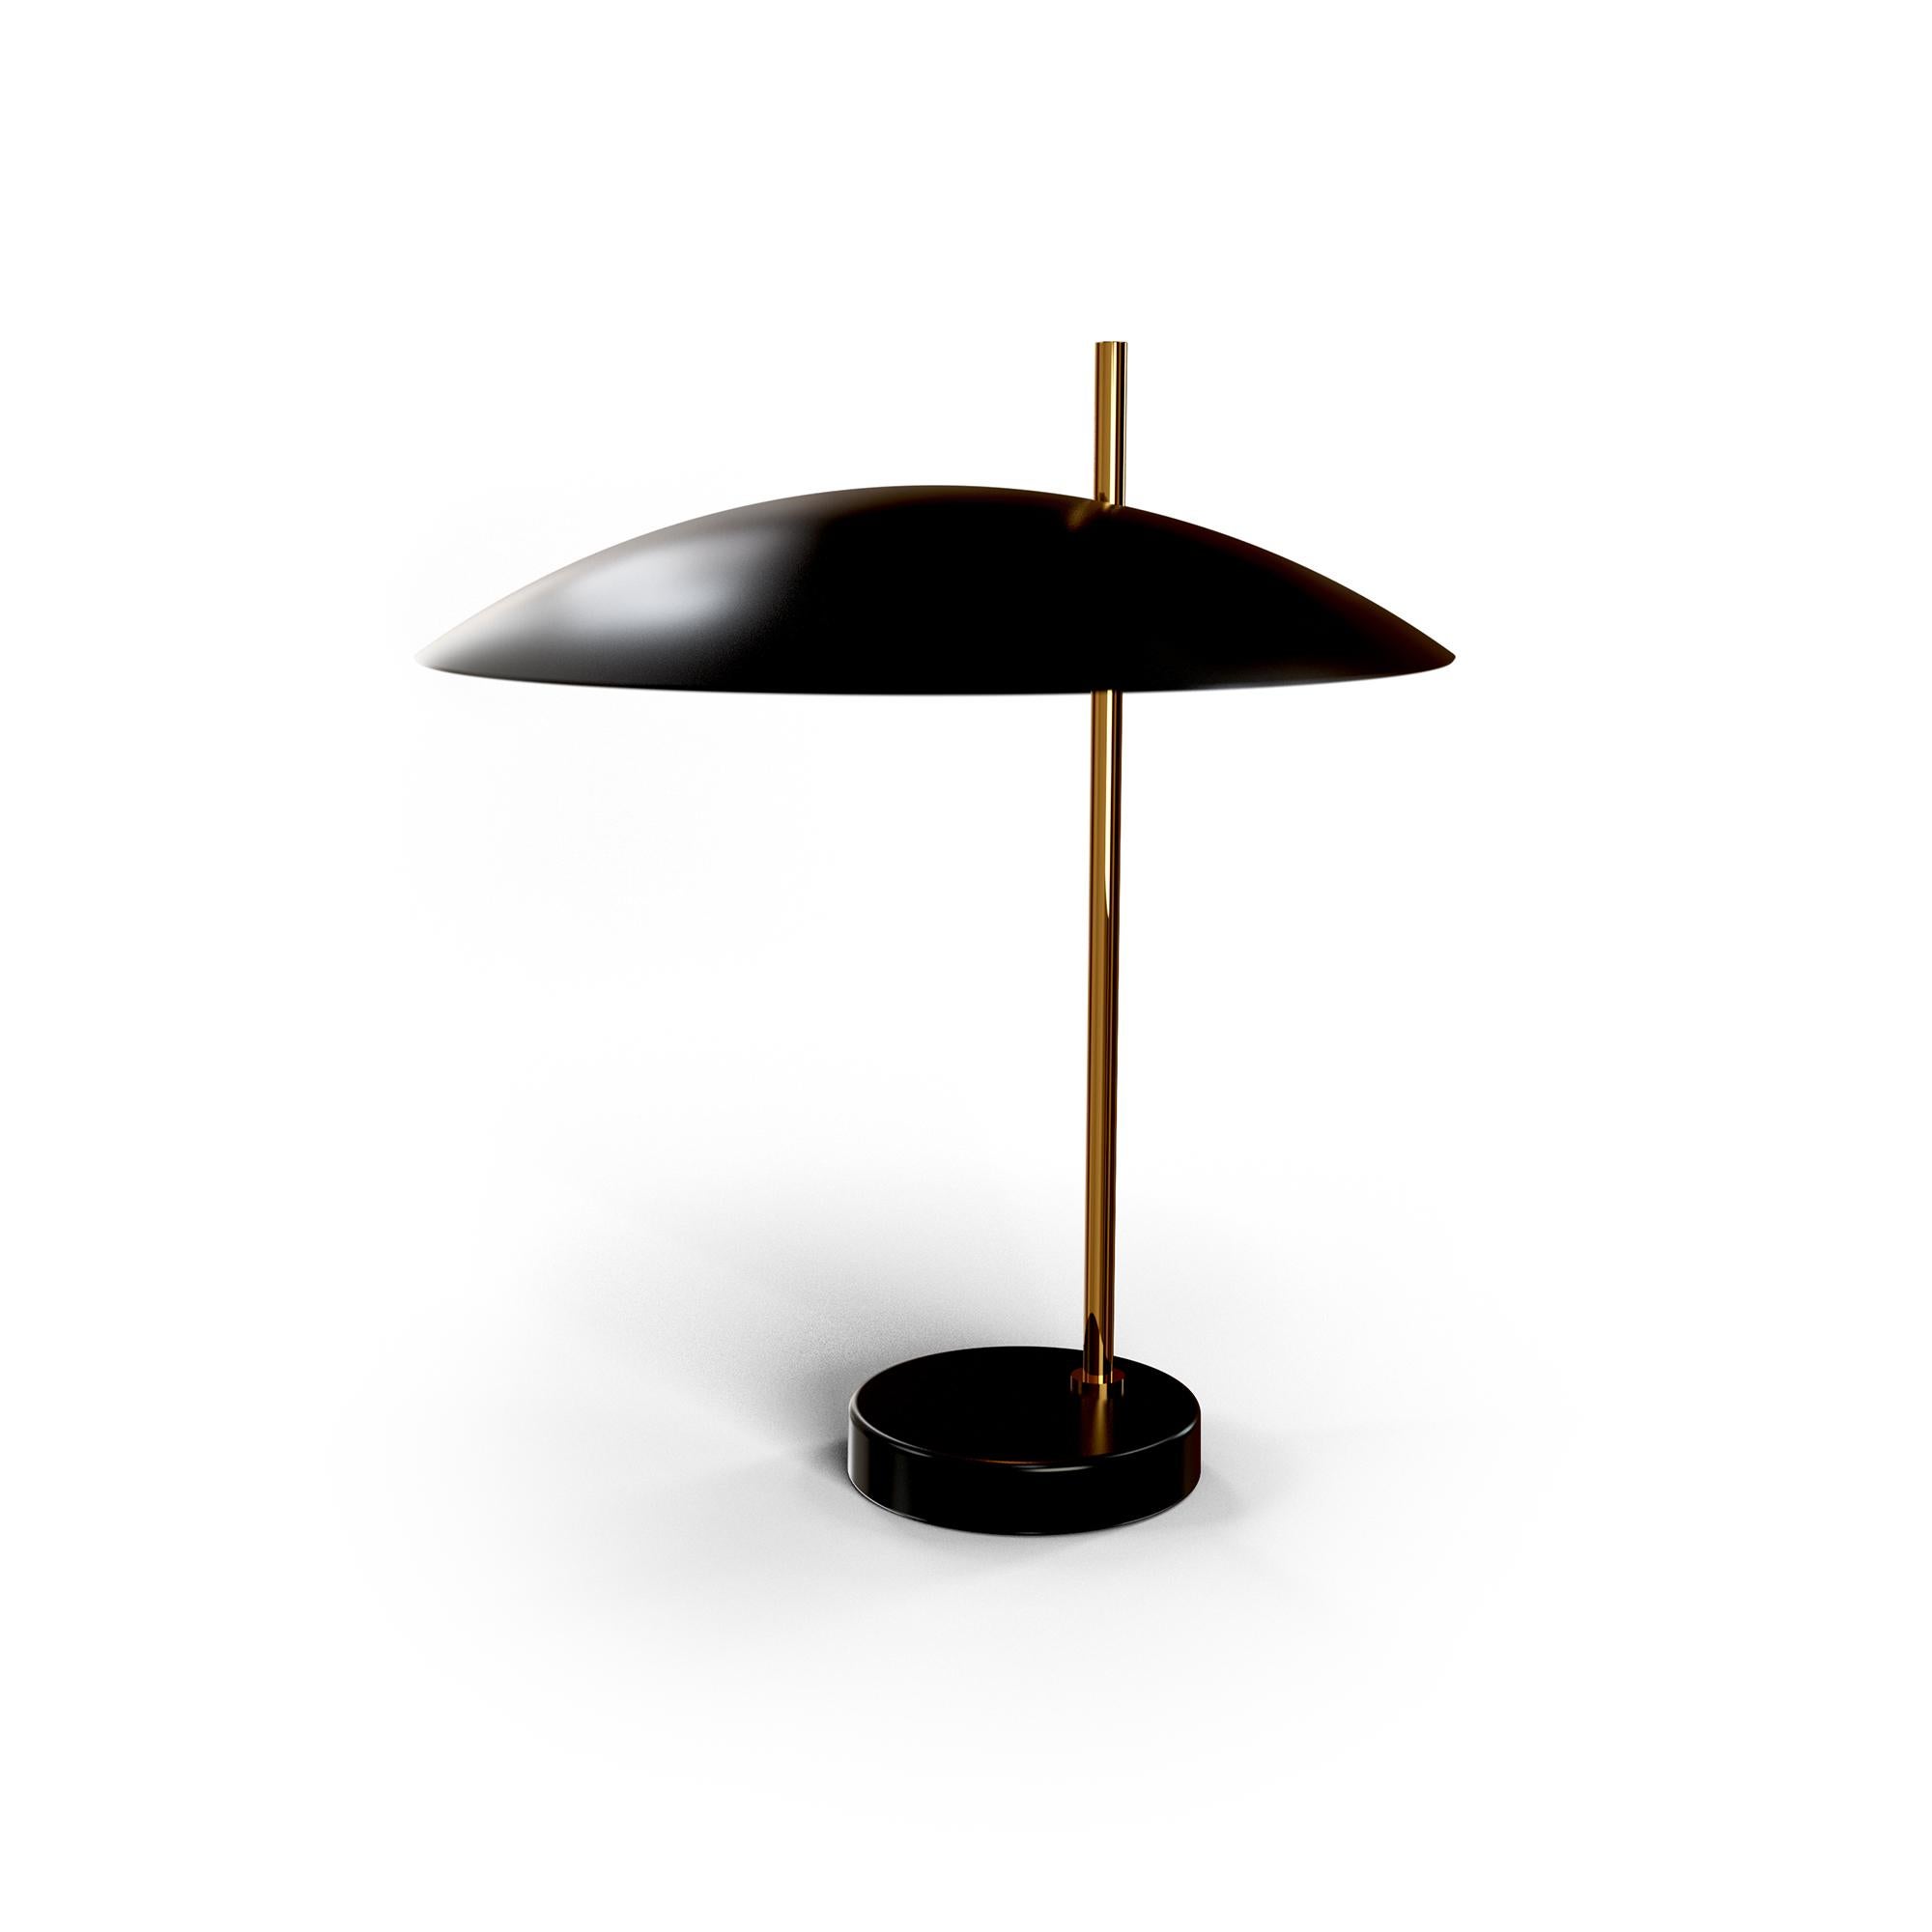 Brushed Brass 1013 Table Lamp by Disderot
Limited Edition. 
Designed by Pierre Disderot.
Dimensions: Ø 34,1 x H 39,77 cm.
Materials: Brushed brass and black metal.

Delivered with authentication certificate. Made in France. Available in brushed